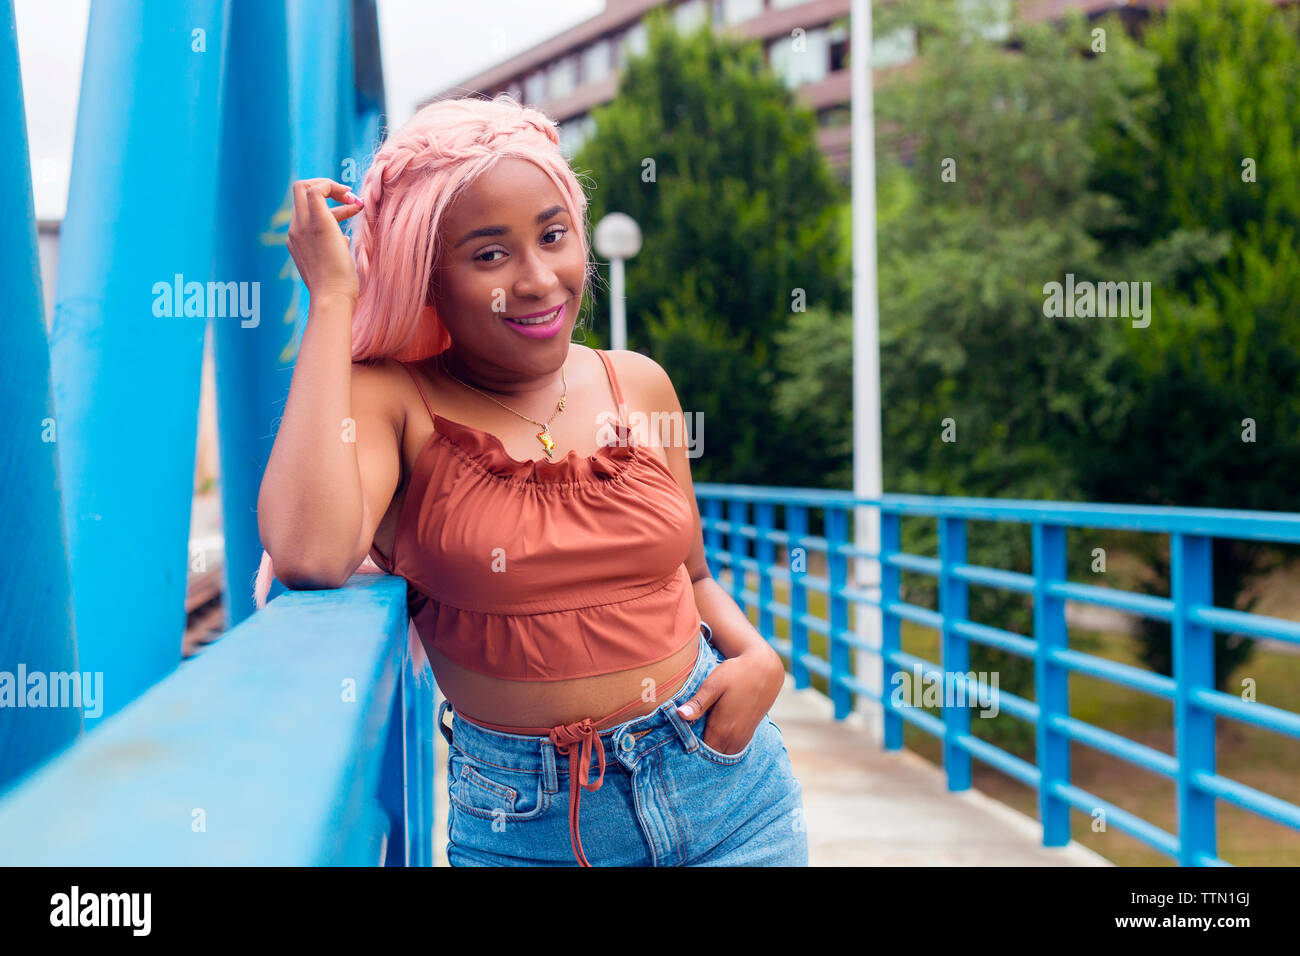 Portrait of smiling woman with pink hair standing by railing on footbridge Stock Photo